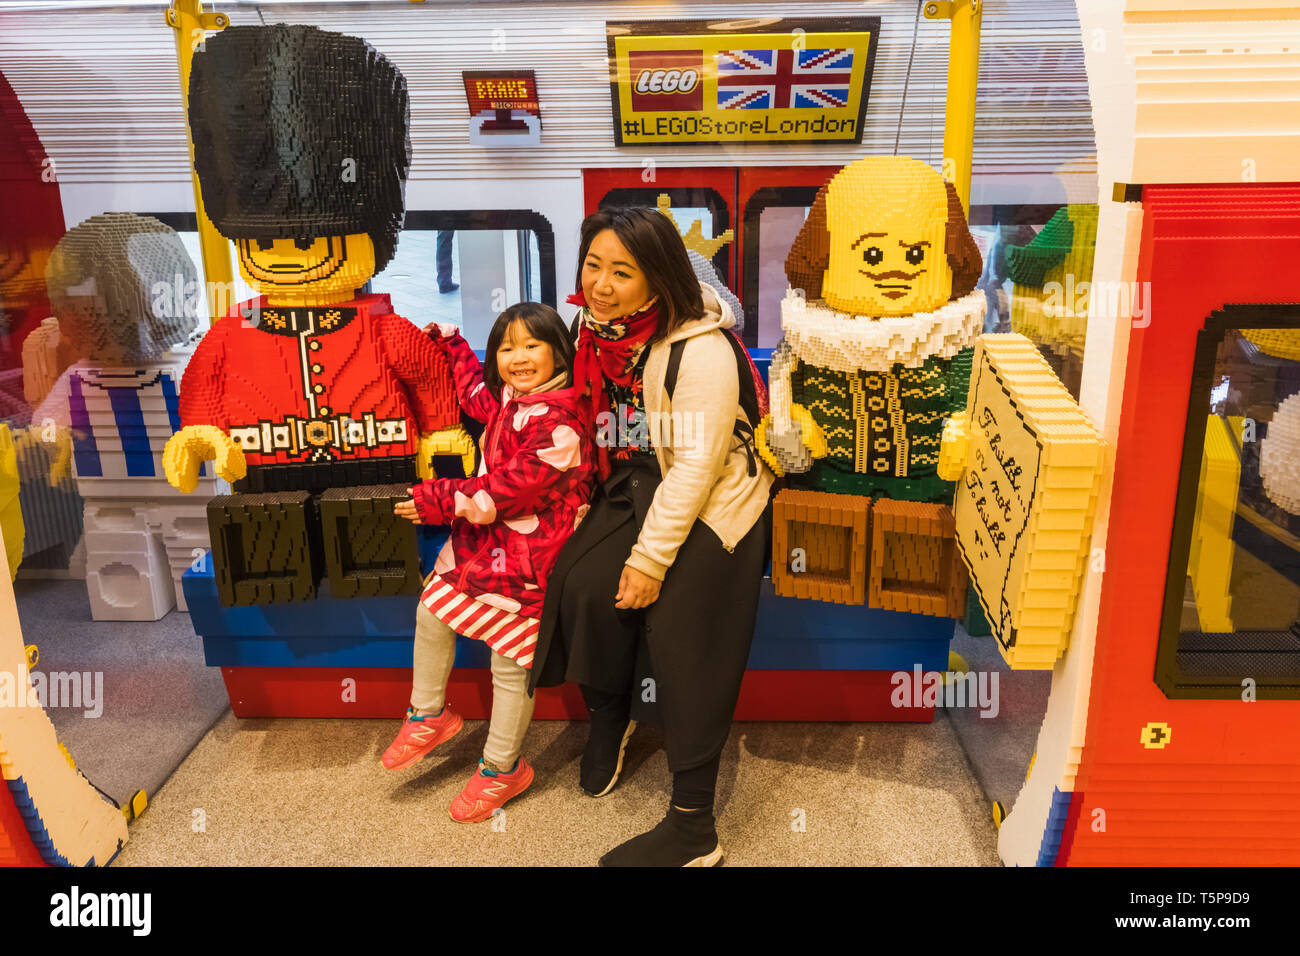 England, London, Leicester Square, Lego Store, Lego Model of Big